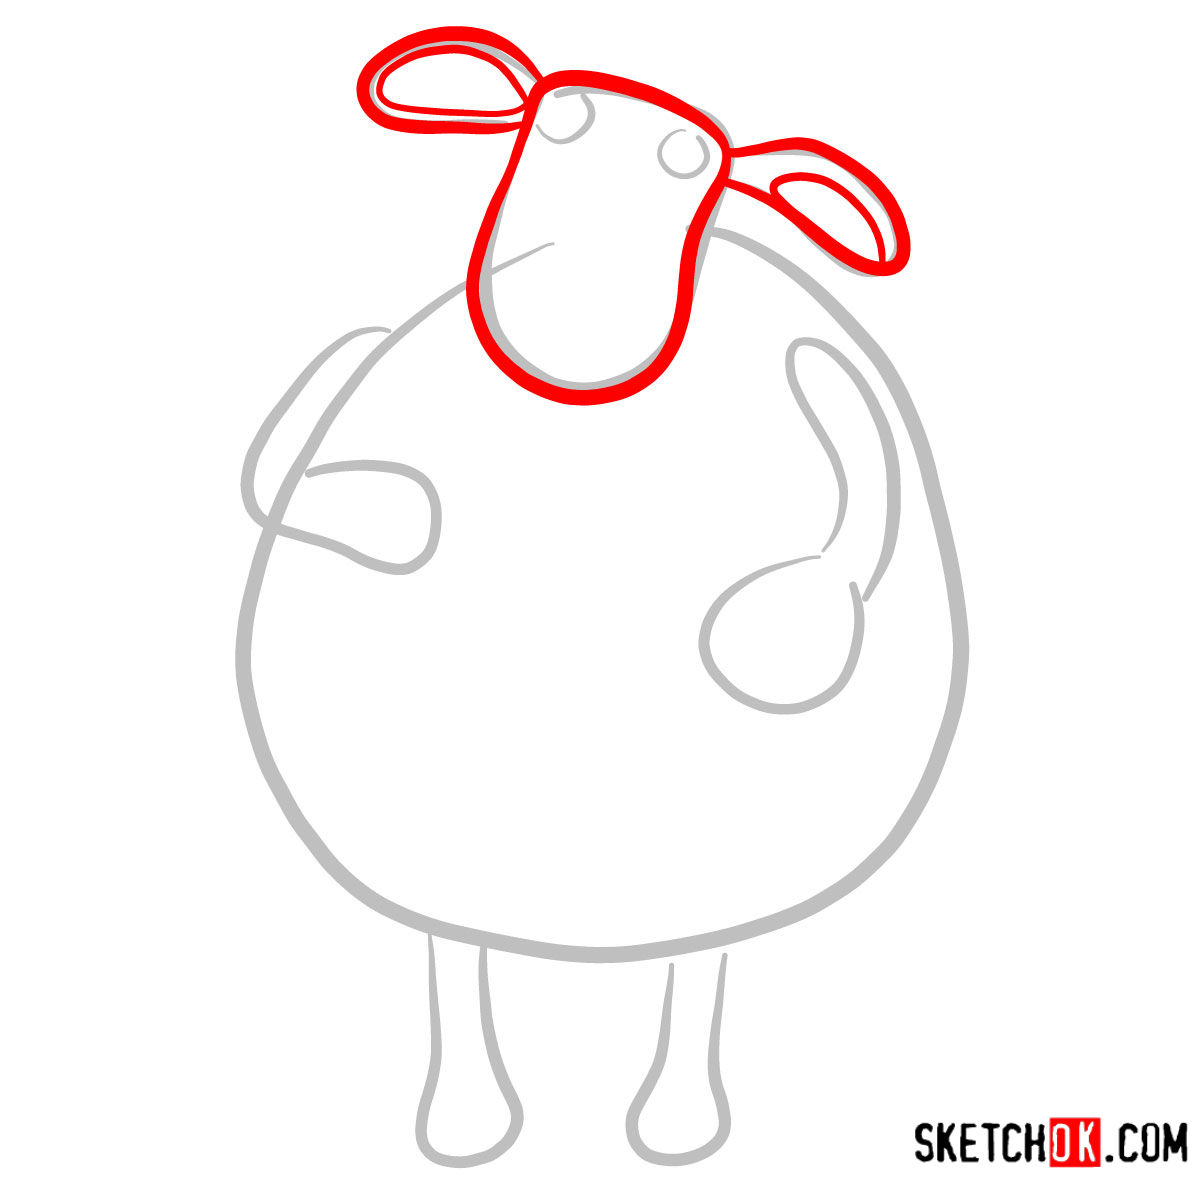 How to draw Nuts | Shaun the Sheep - step 02